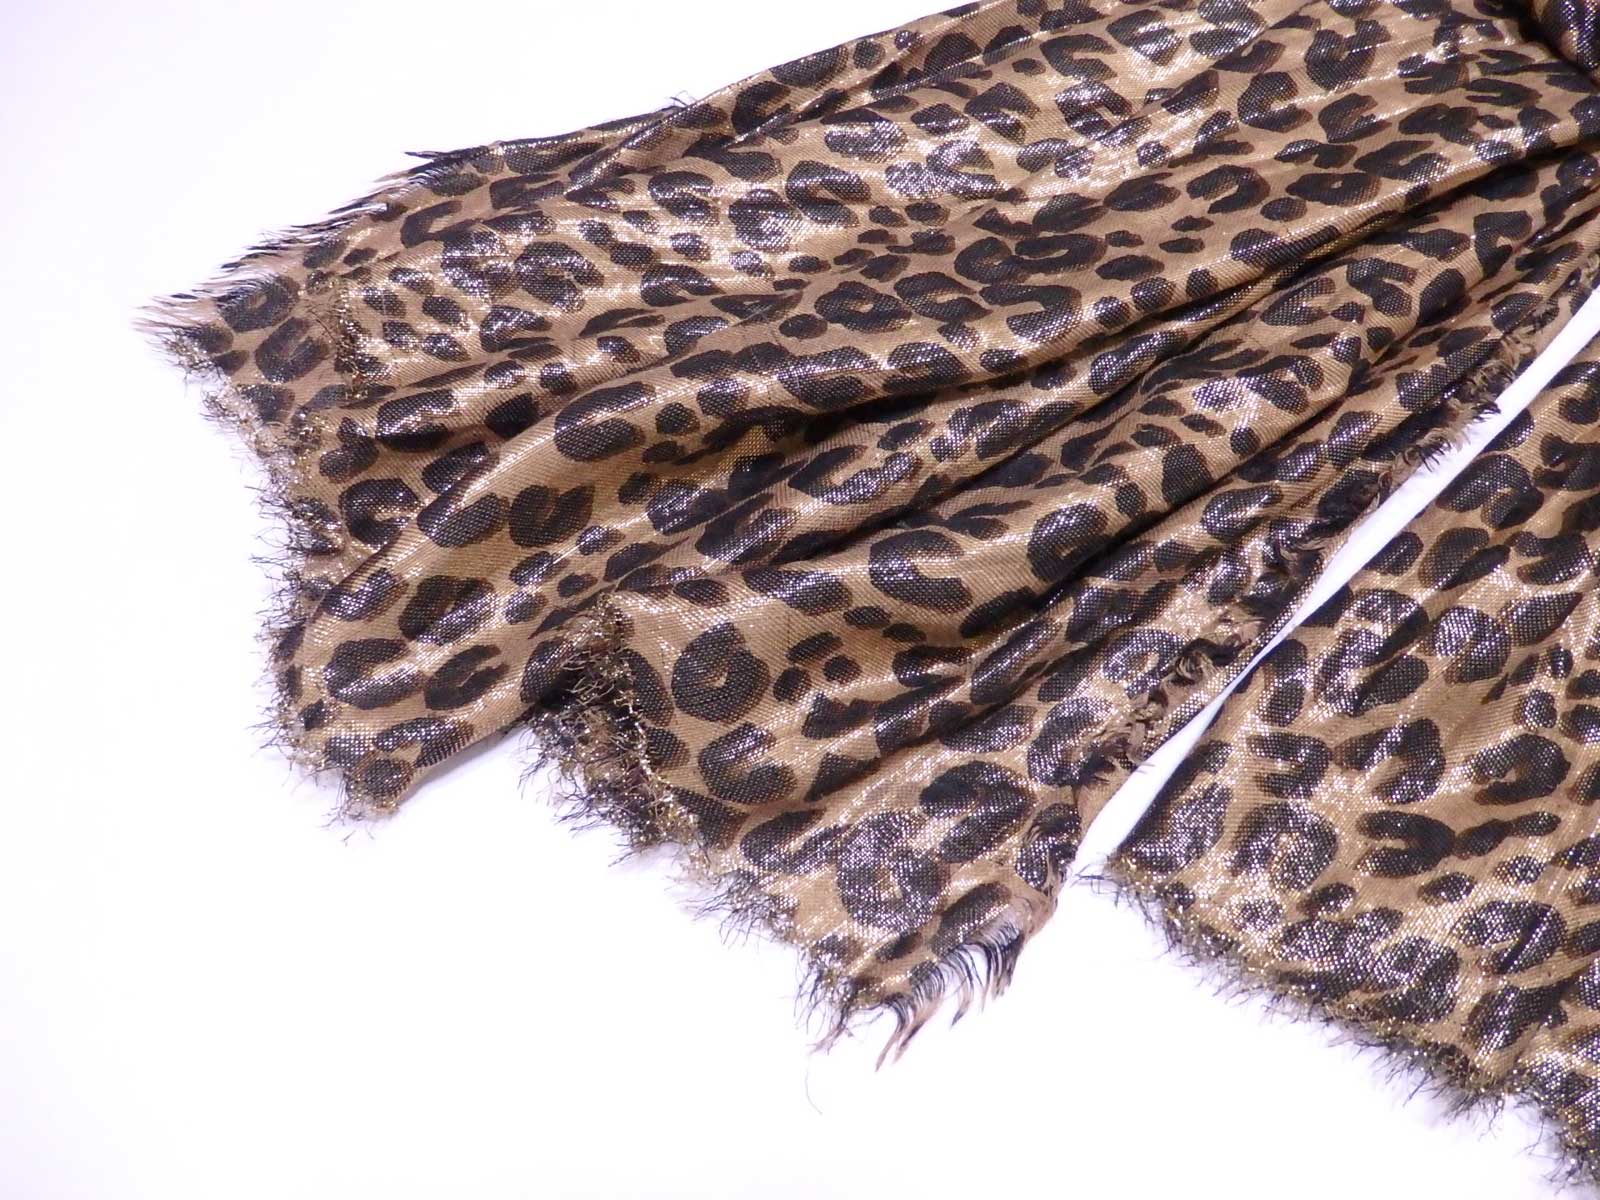 Auth Louis Vuitton Stephen Sprouse Leopard Shawl Scarf Brown/Gold *USED* e40764 | eBay